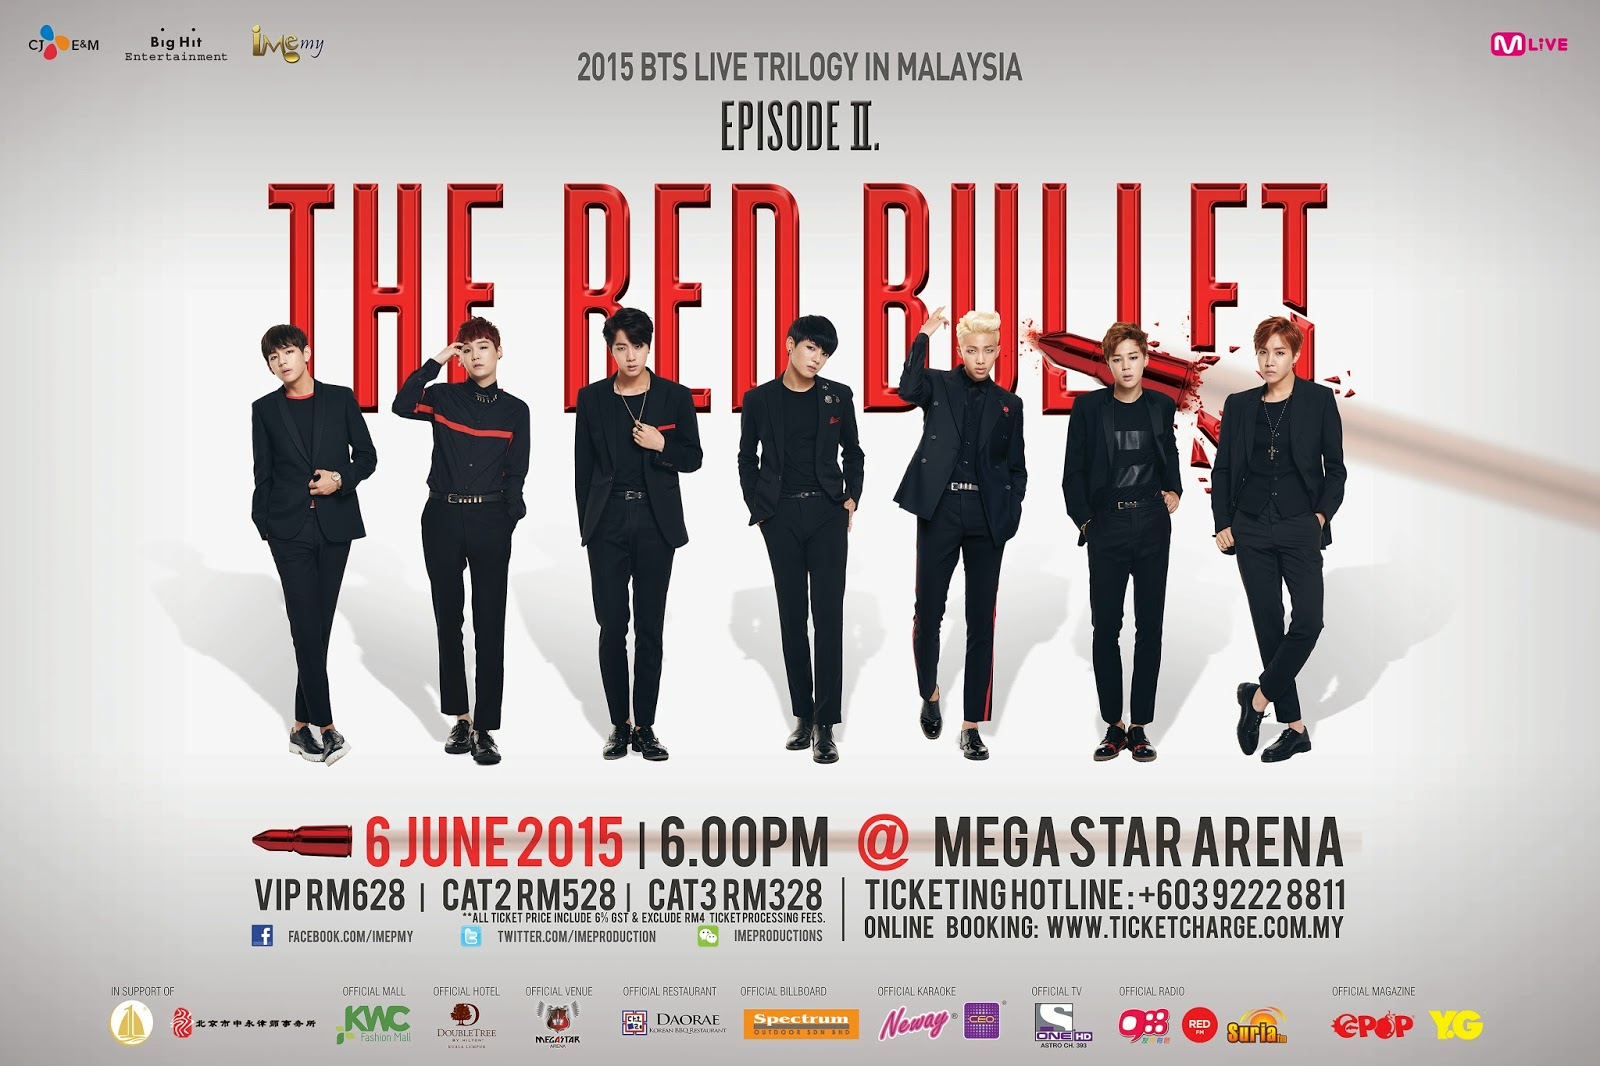 [Upcoming Event] 2015 BTS LIVE TRILOGY IN MALAYSIA “EPISODE II. THE RED BULLET”